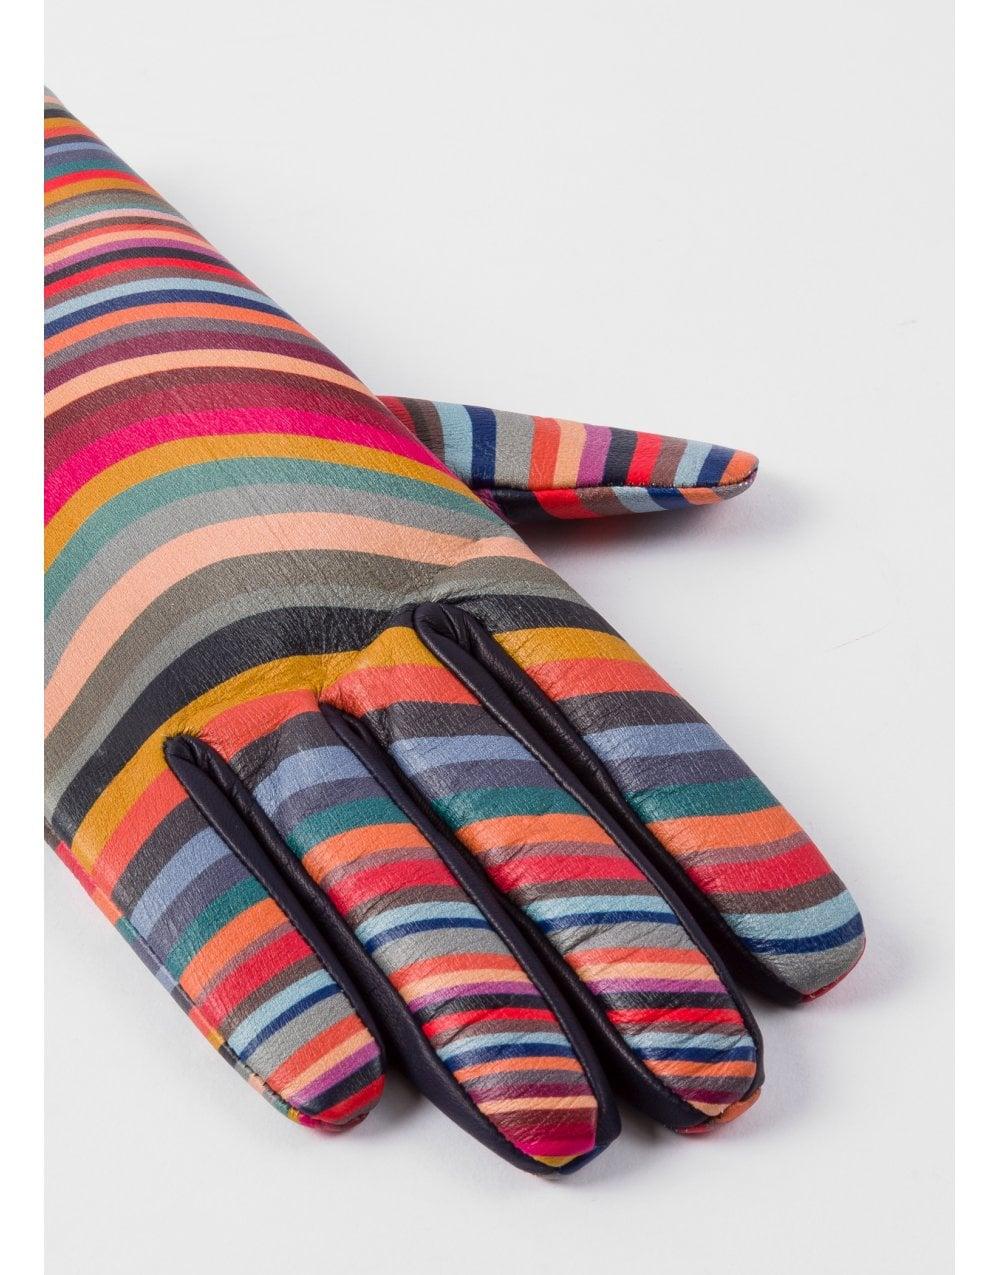 Paul Smith Leather All Over Swirl Gloves | Lyst